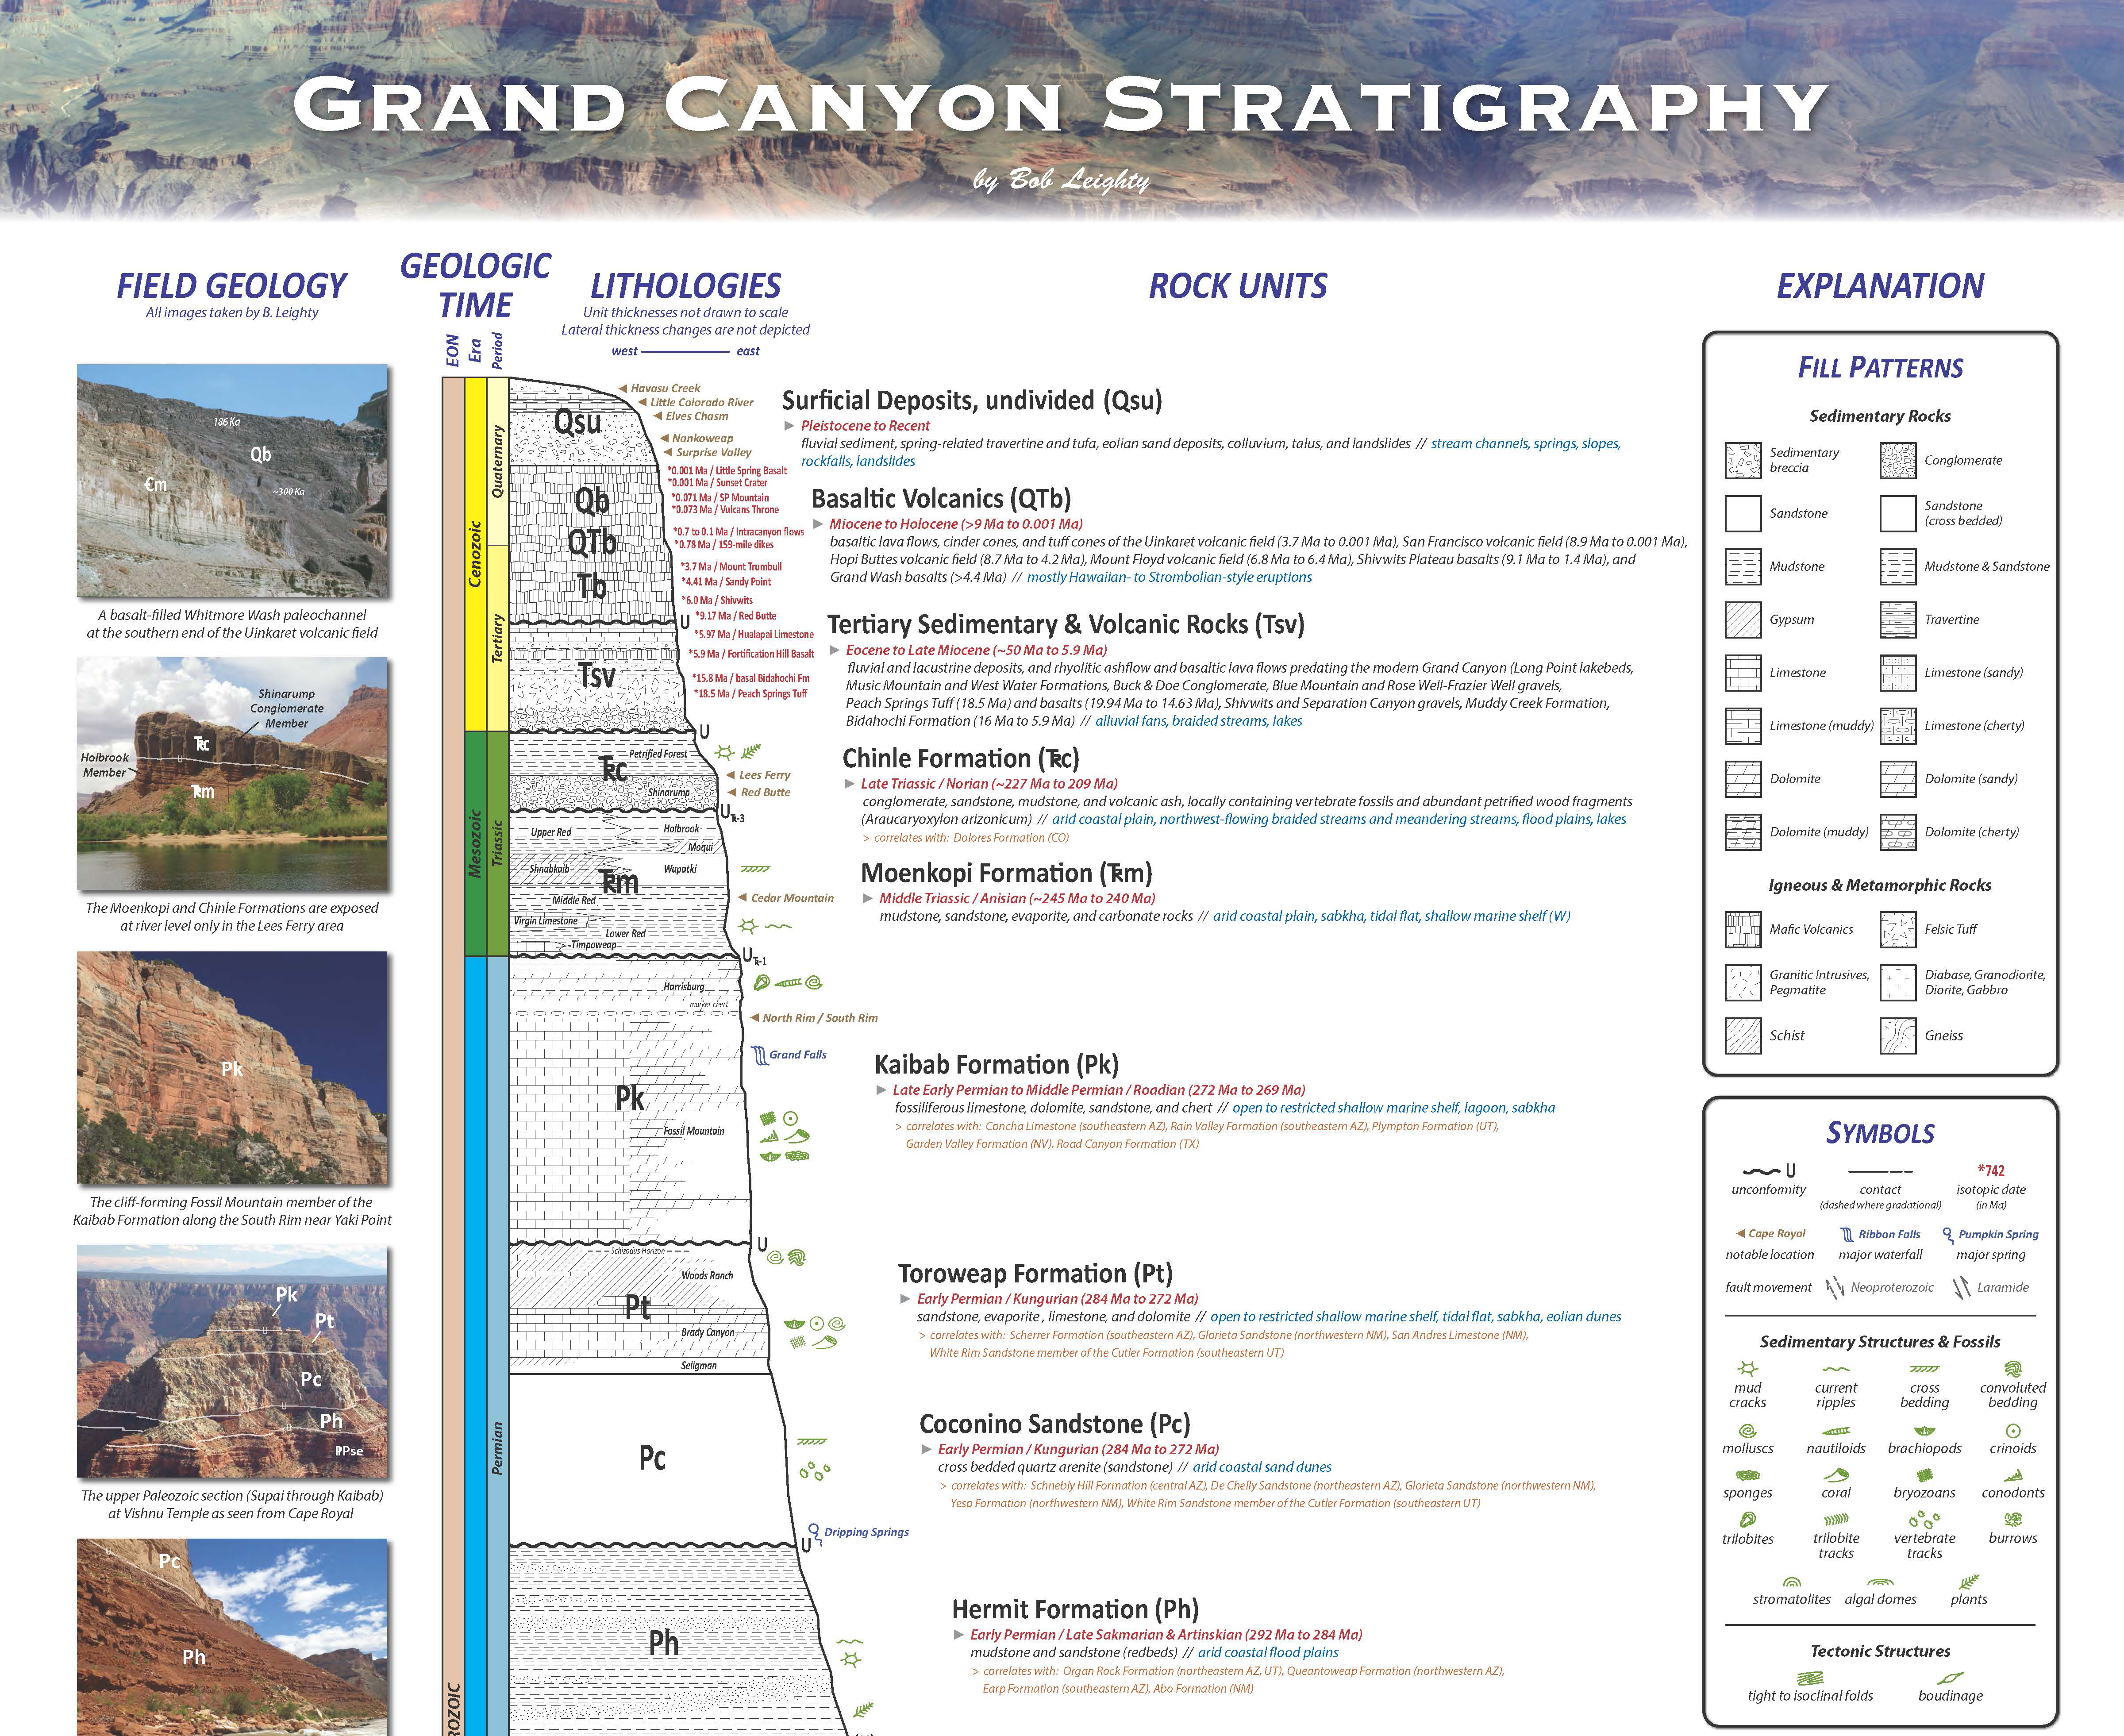 Leighty - Grand Canyon Stratigraphy